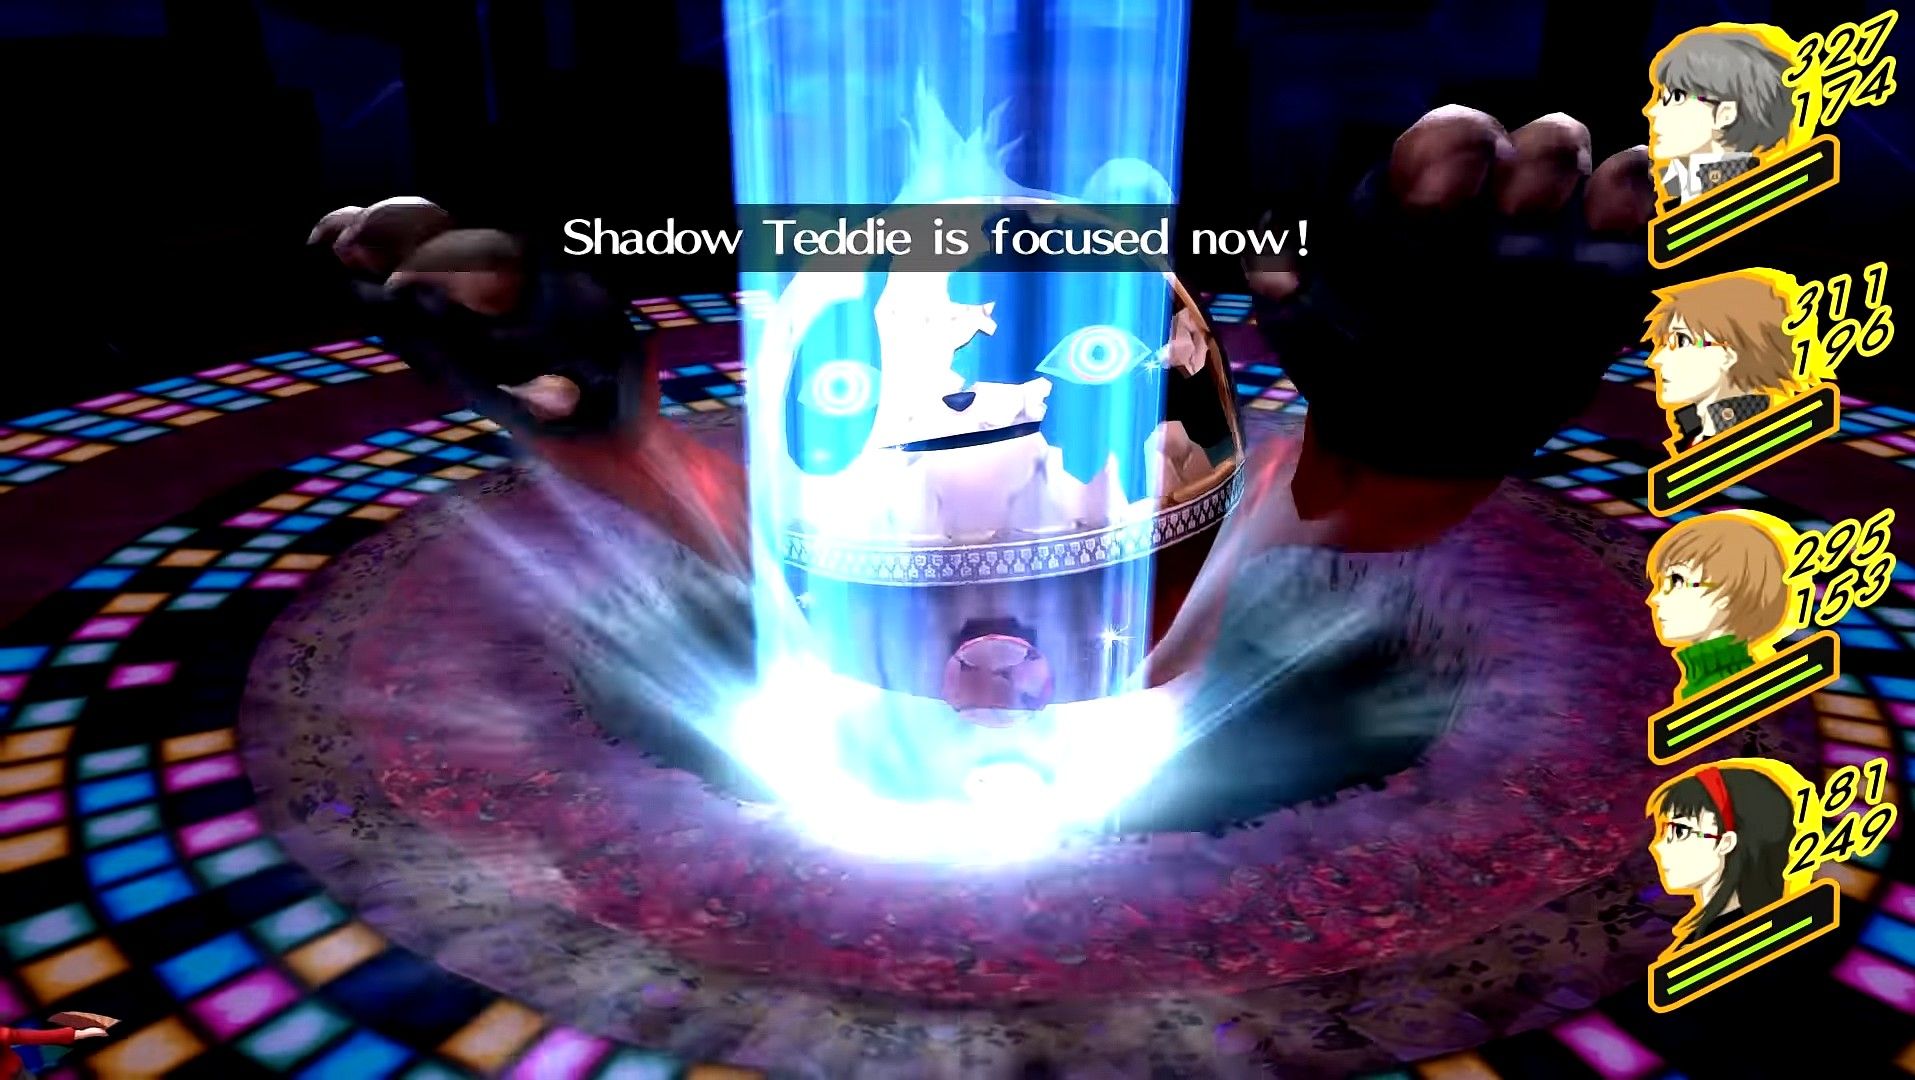 shadow teddie growing focused after using mind charge in persona 4 golden